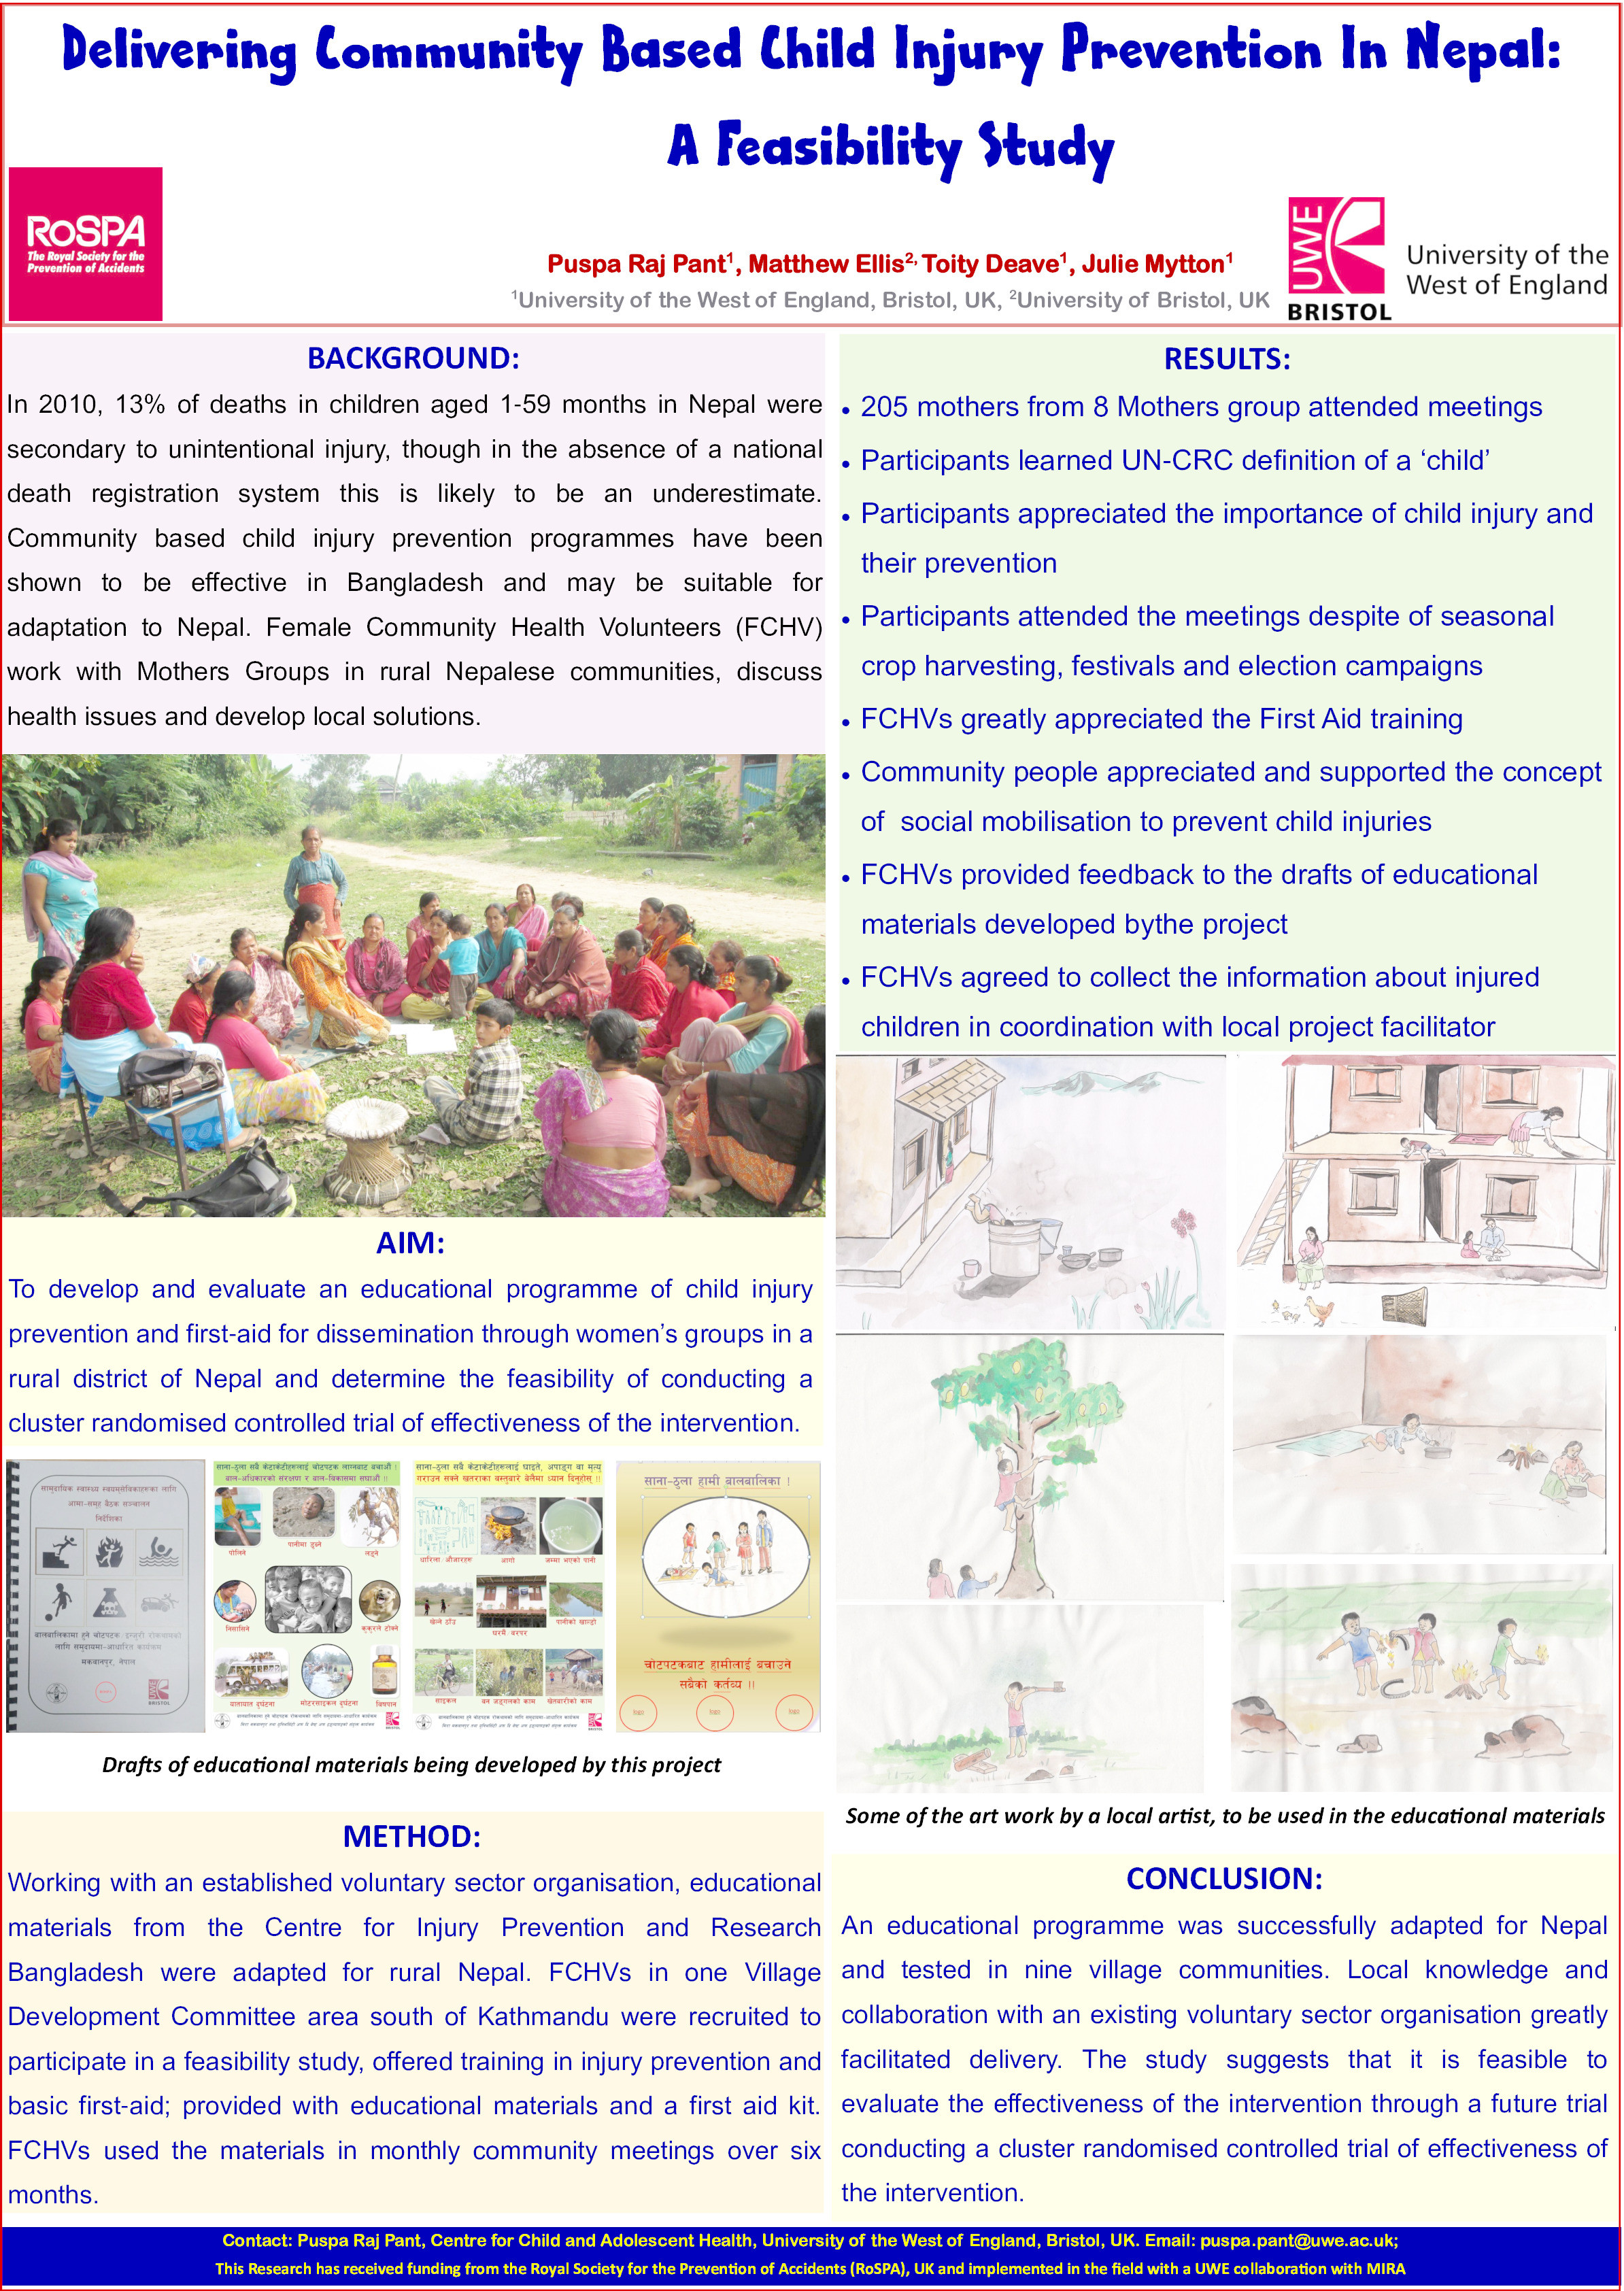 Delivering community based child injury prevention in Nepal: A feasibility study Thumbnail